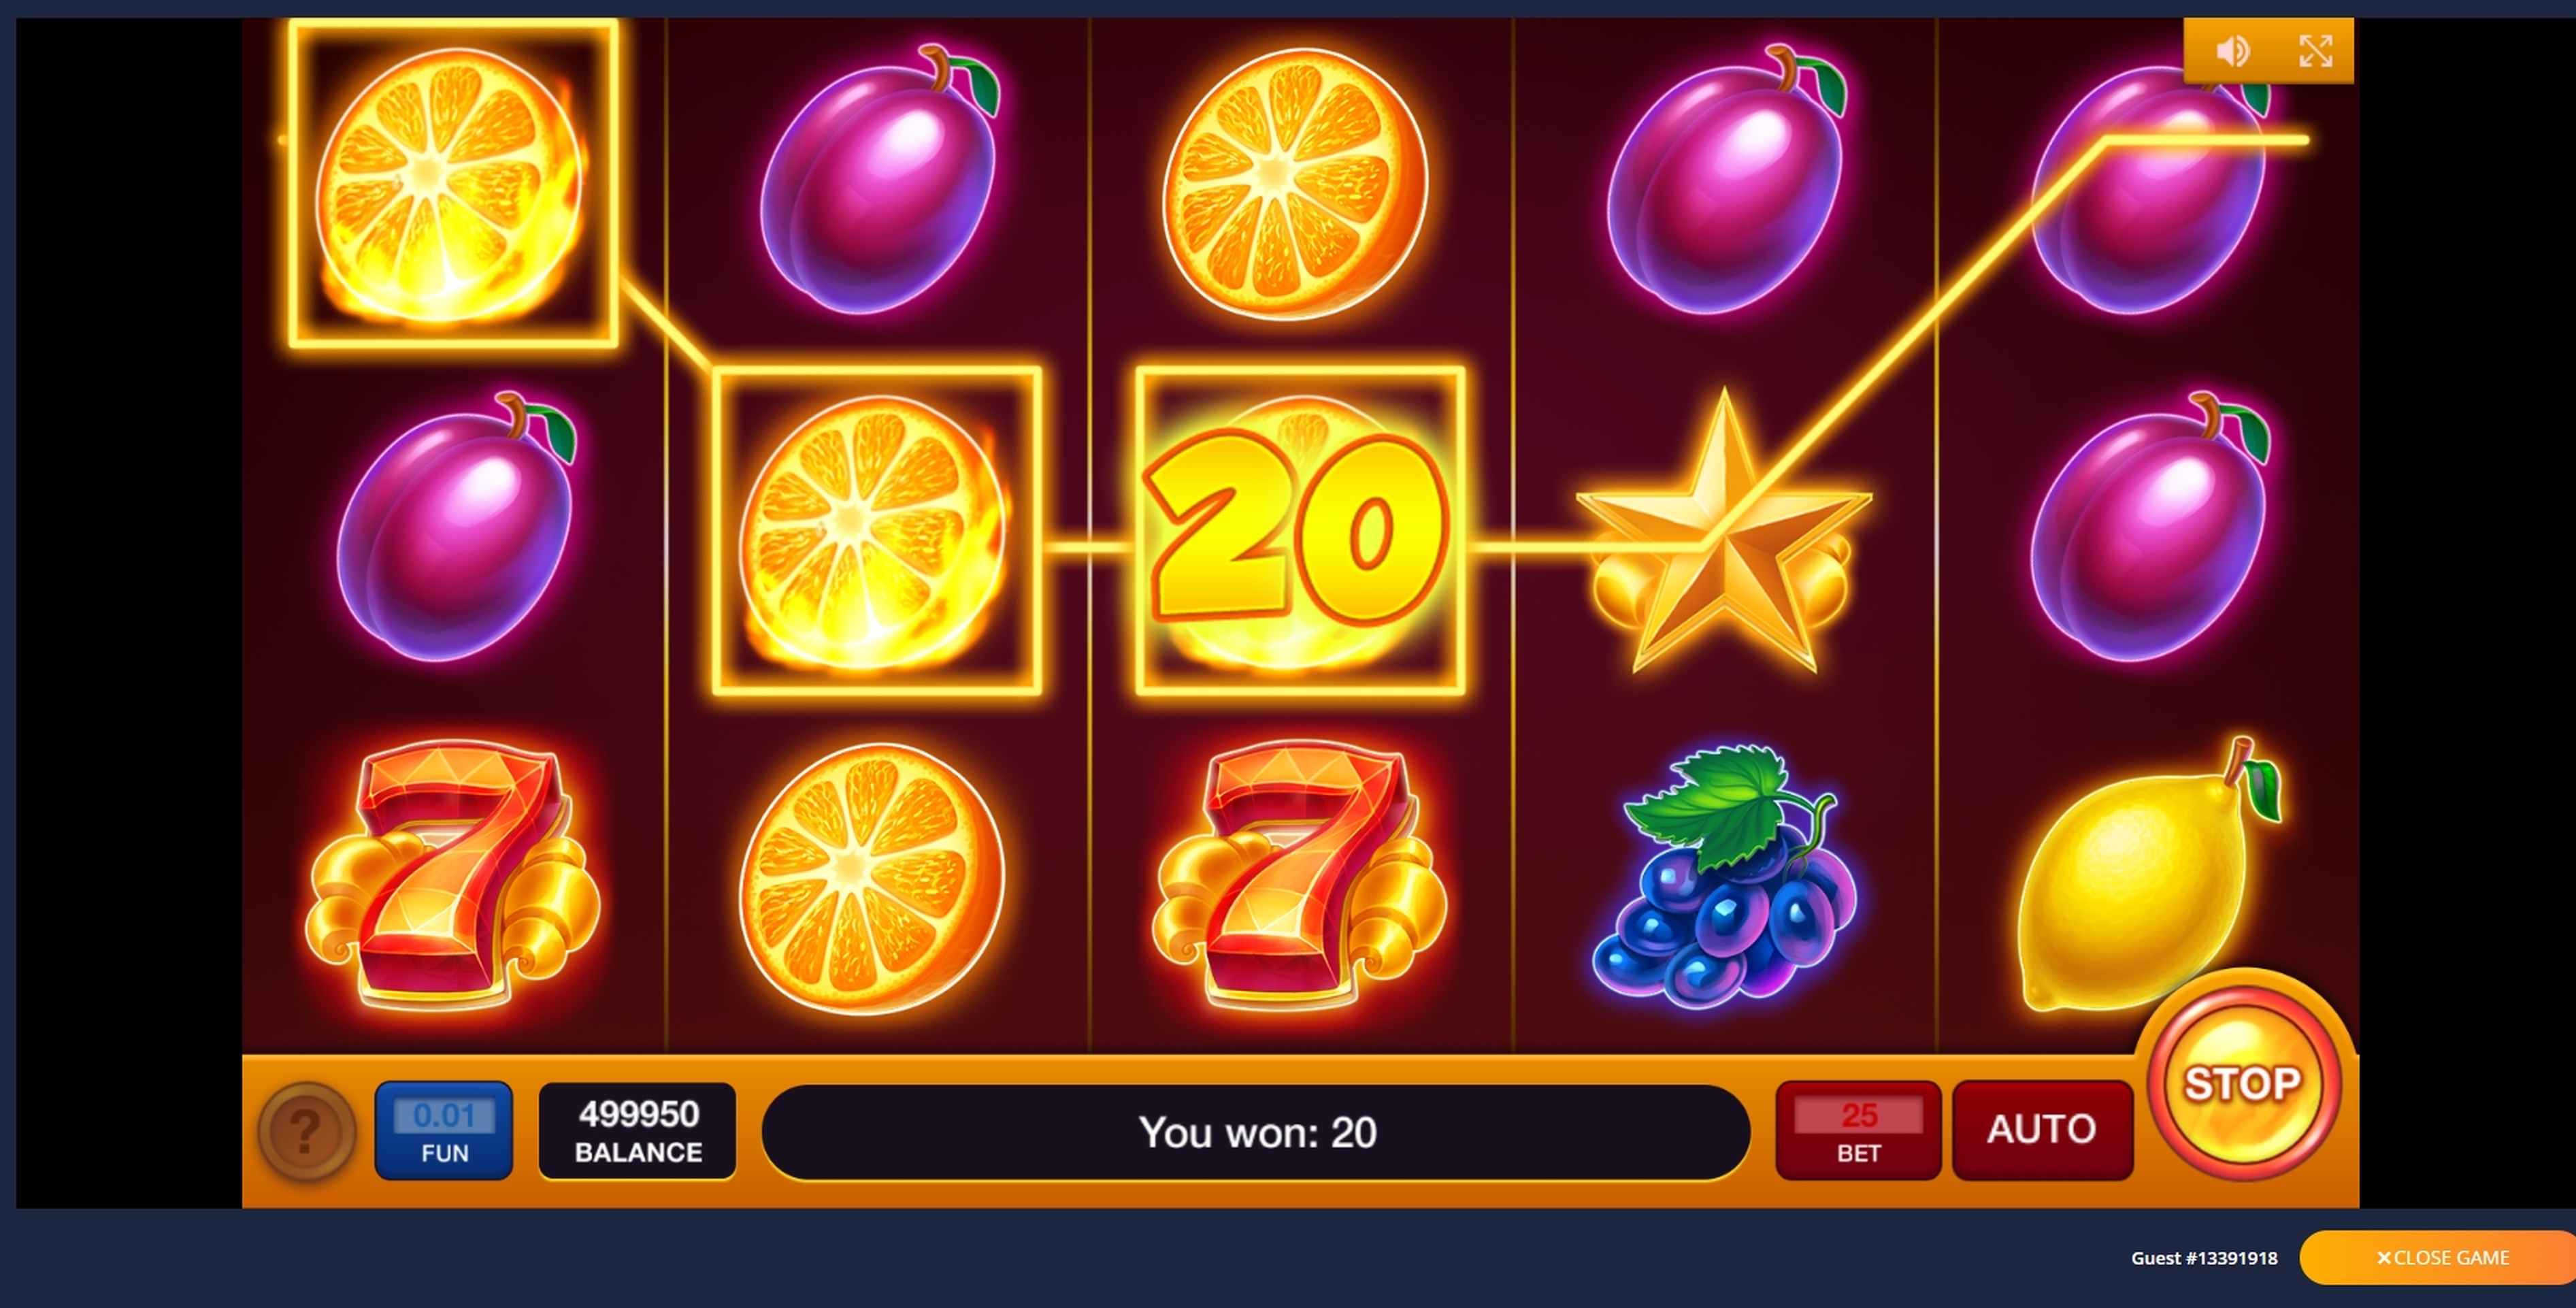 Win Money in Blazing Fruits Free Slot Game by Inbet Games